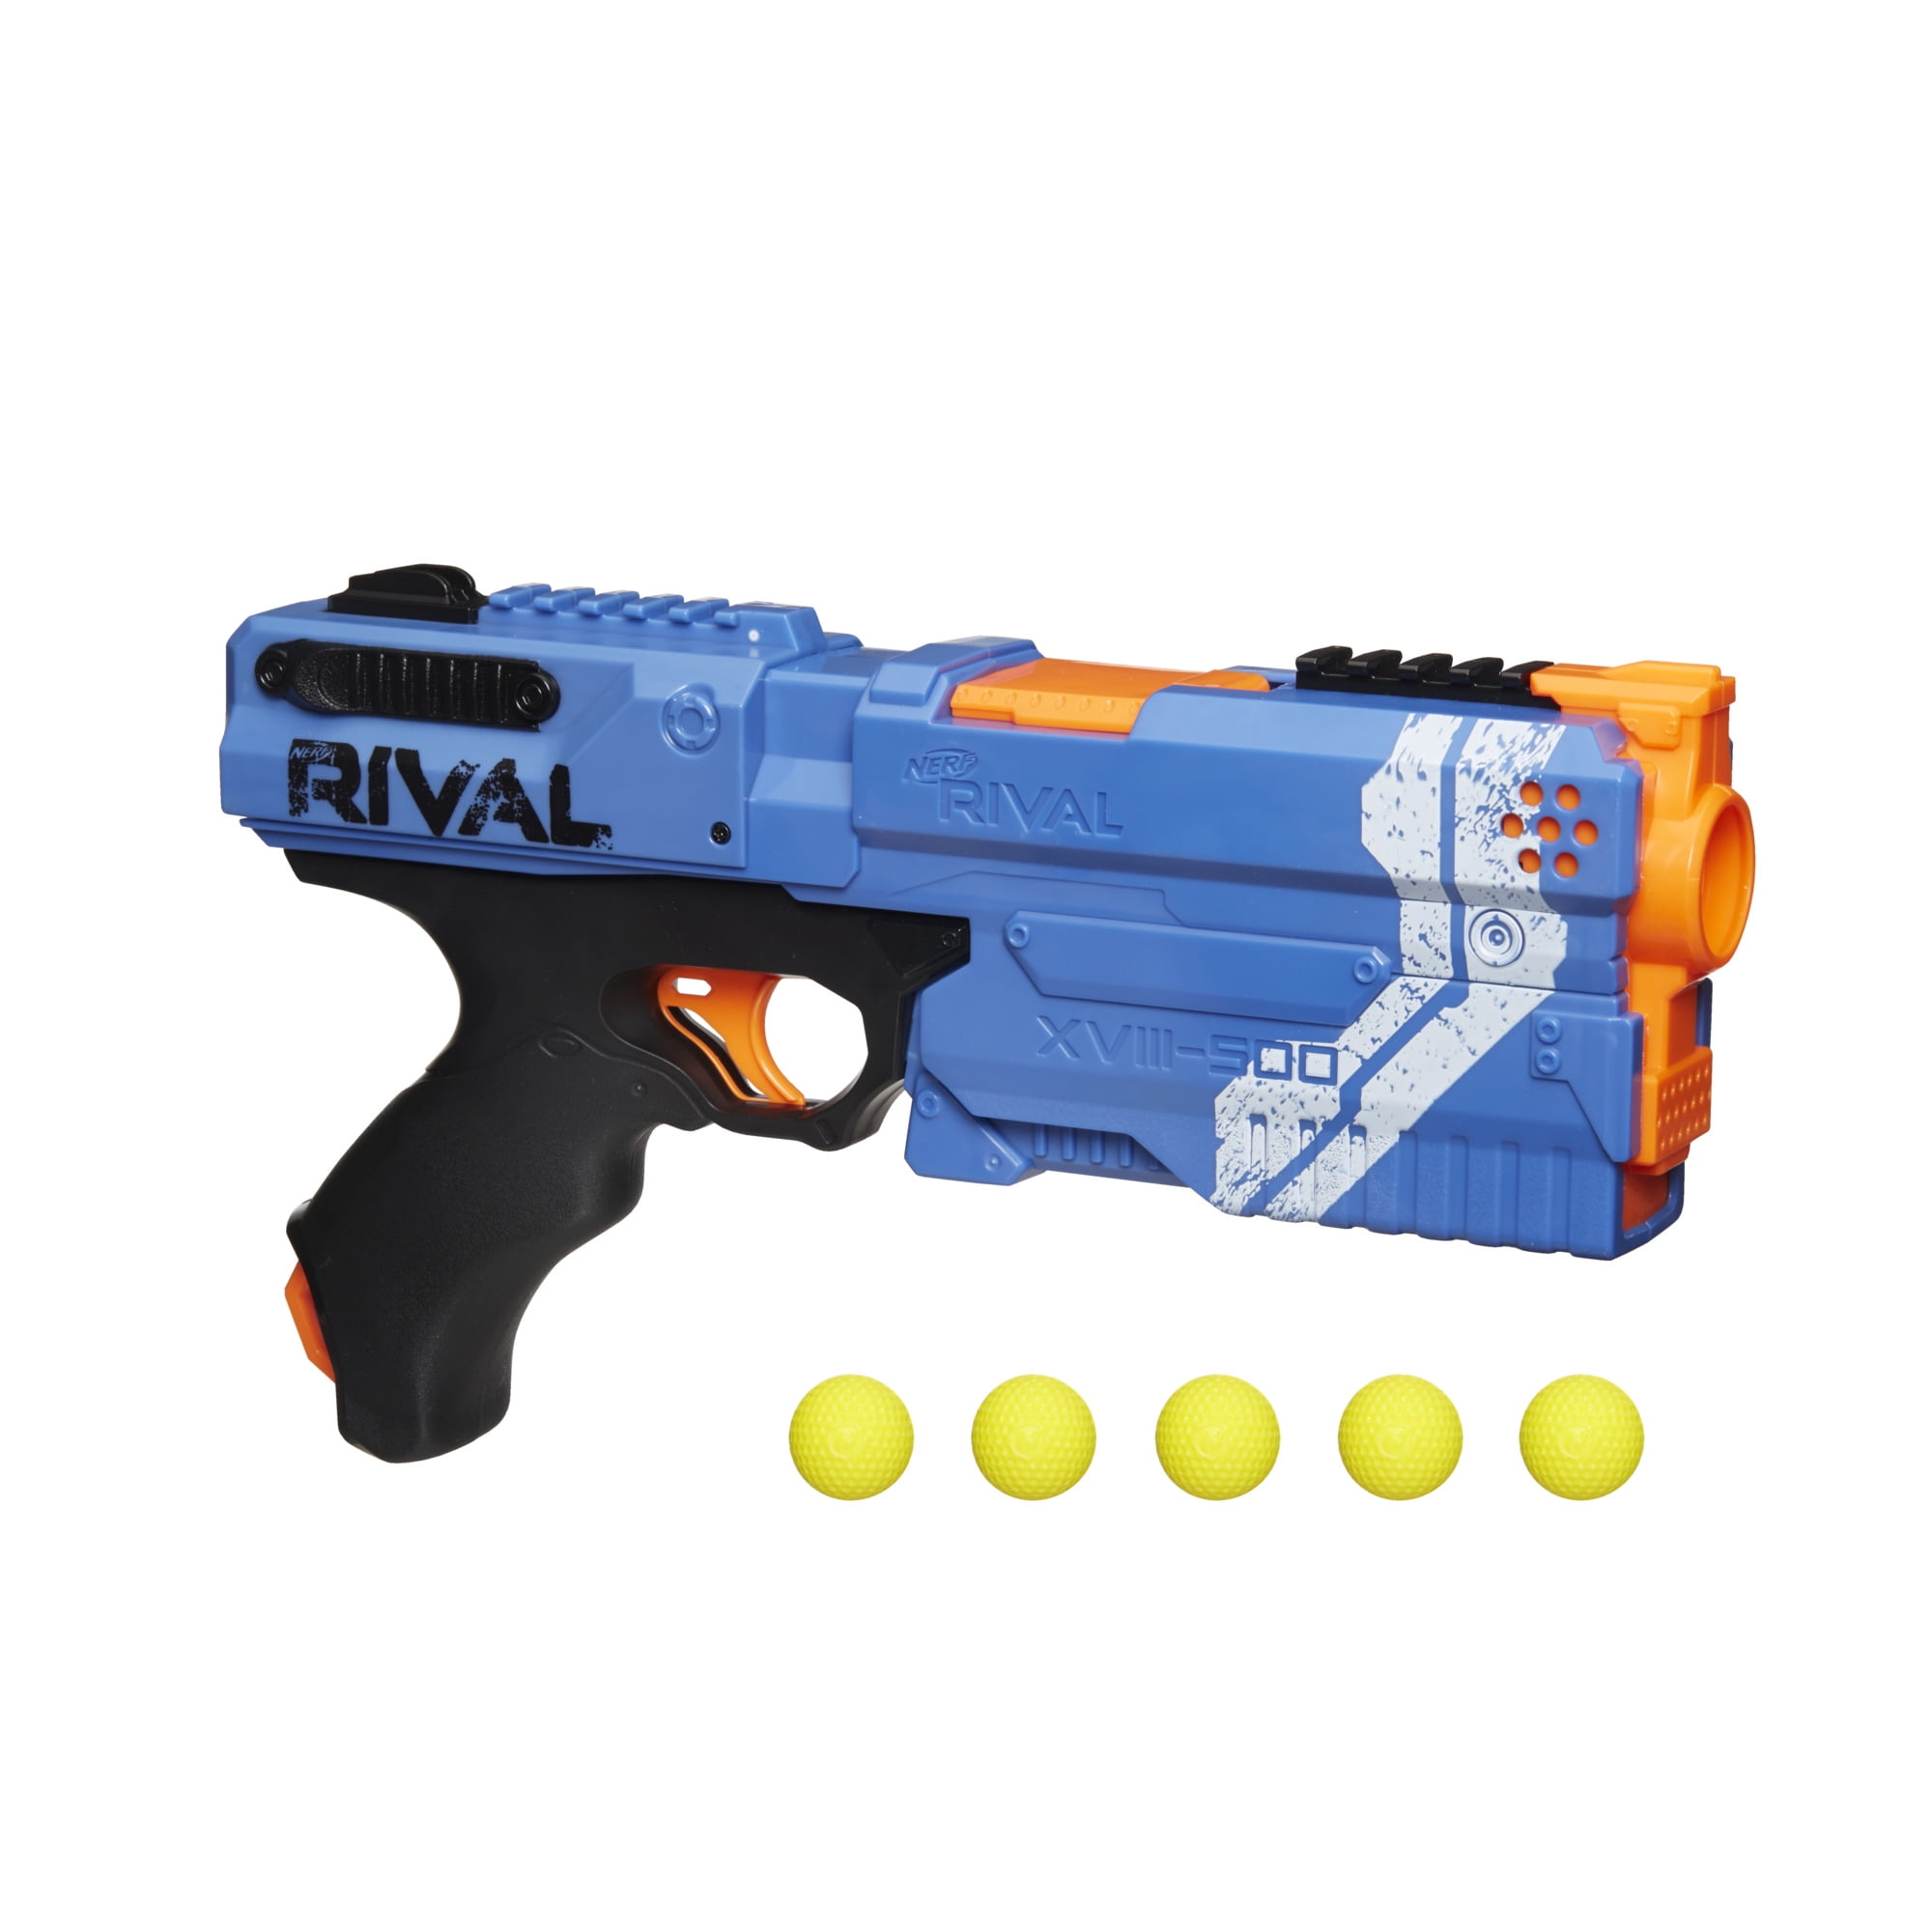 NERF Rival Blaster Mercury Xix-500 Edge Series With Target and 5 Rounds for sale online 